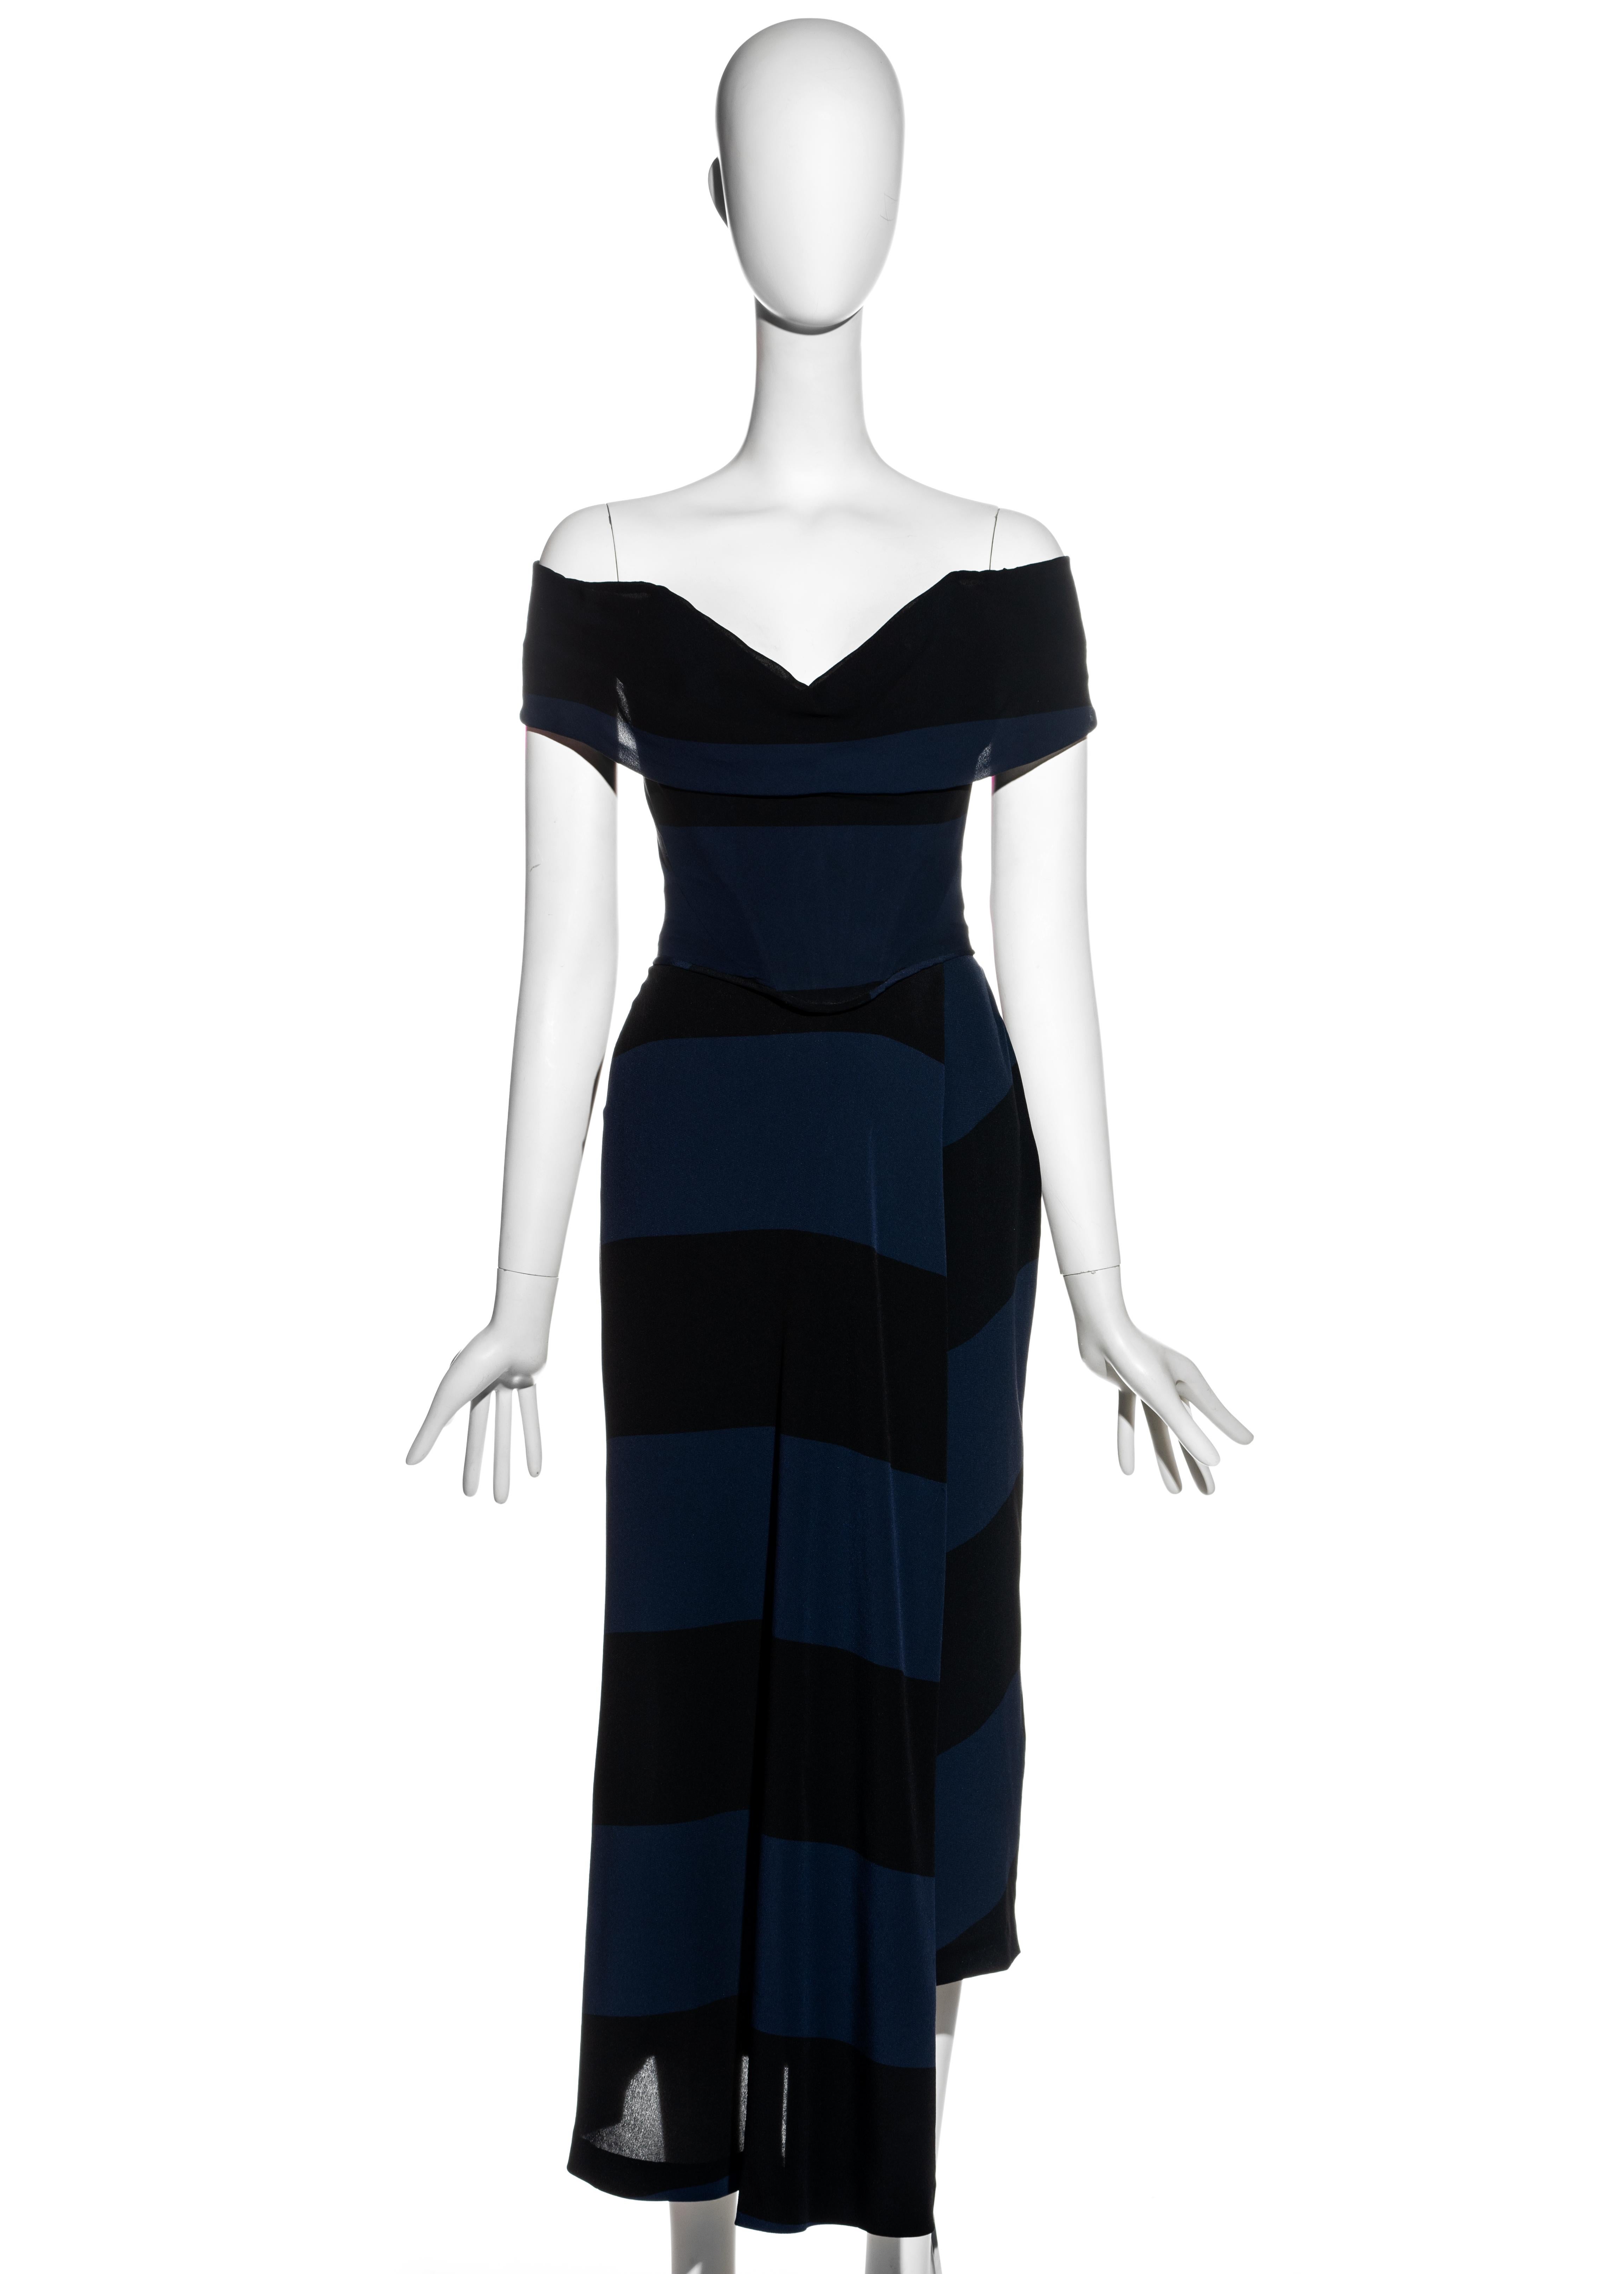 ▪ Vivienne Westwood Couture navy striped chiffon evening two piece
▪ 100% Silk
▪ Off-shoulder corset with draped neckline 
▪ Internal boning designed to cinch the waist and push breasts up 
▪ Wrap-over skirt with with asymmetric hemline 
▪ FR 38 -